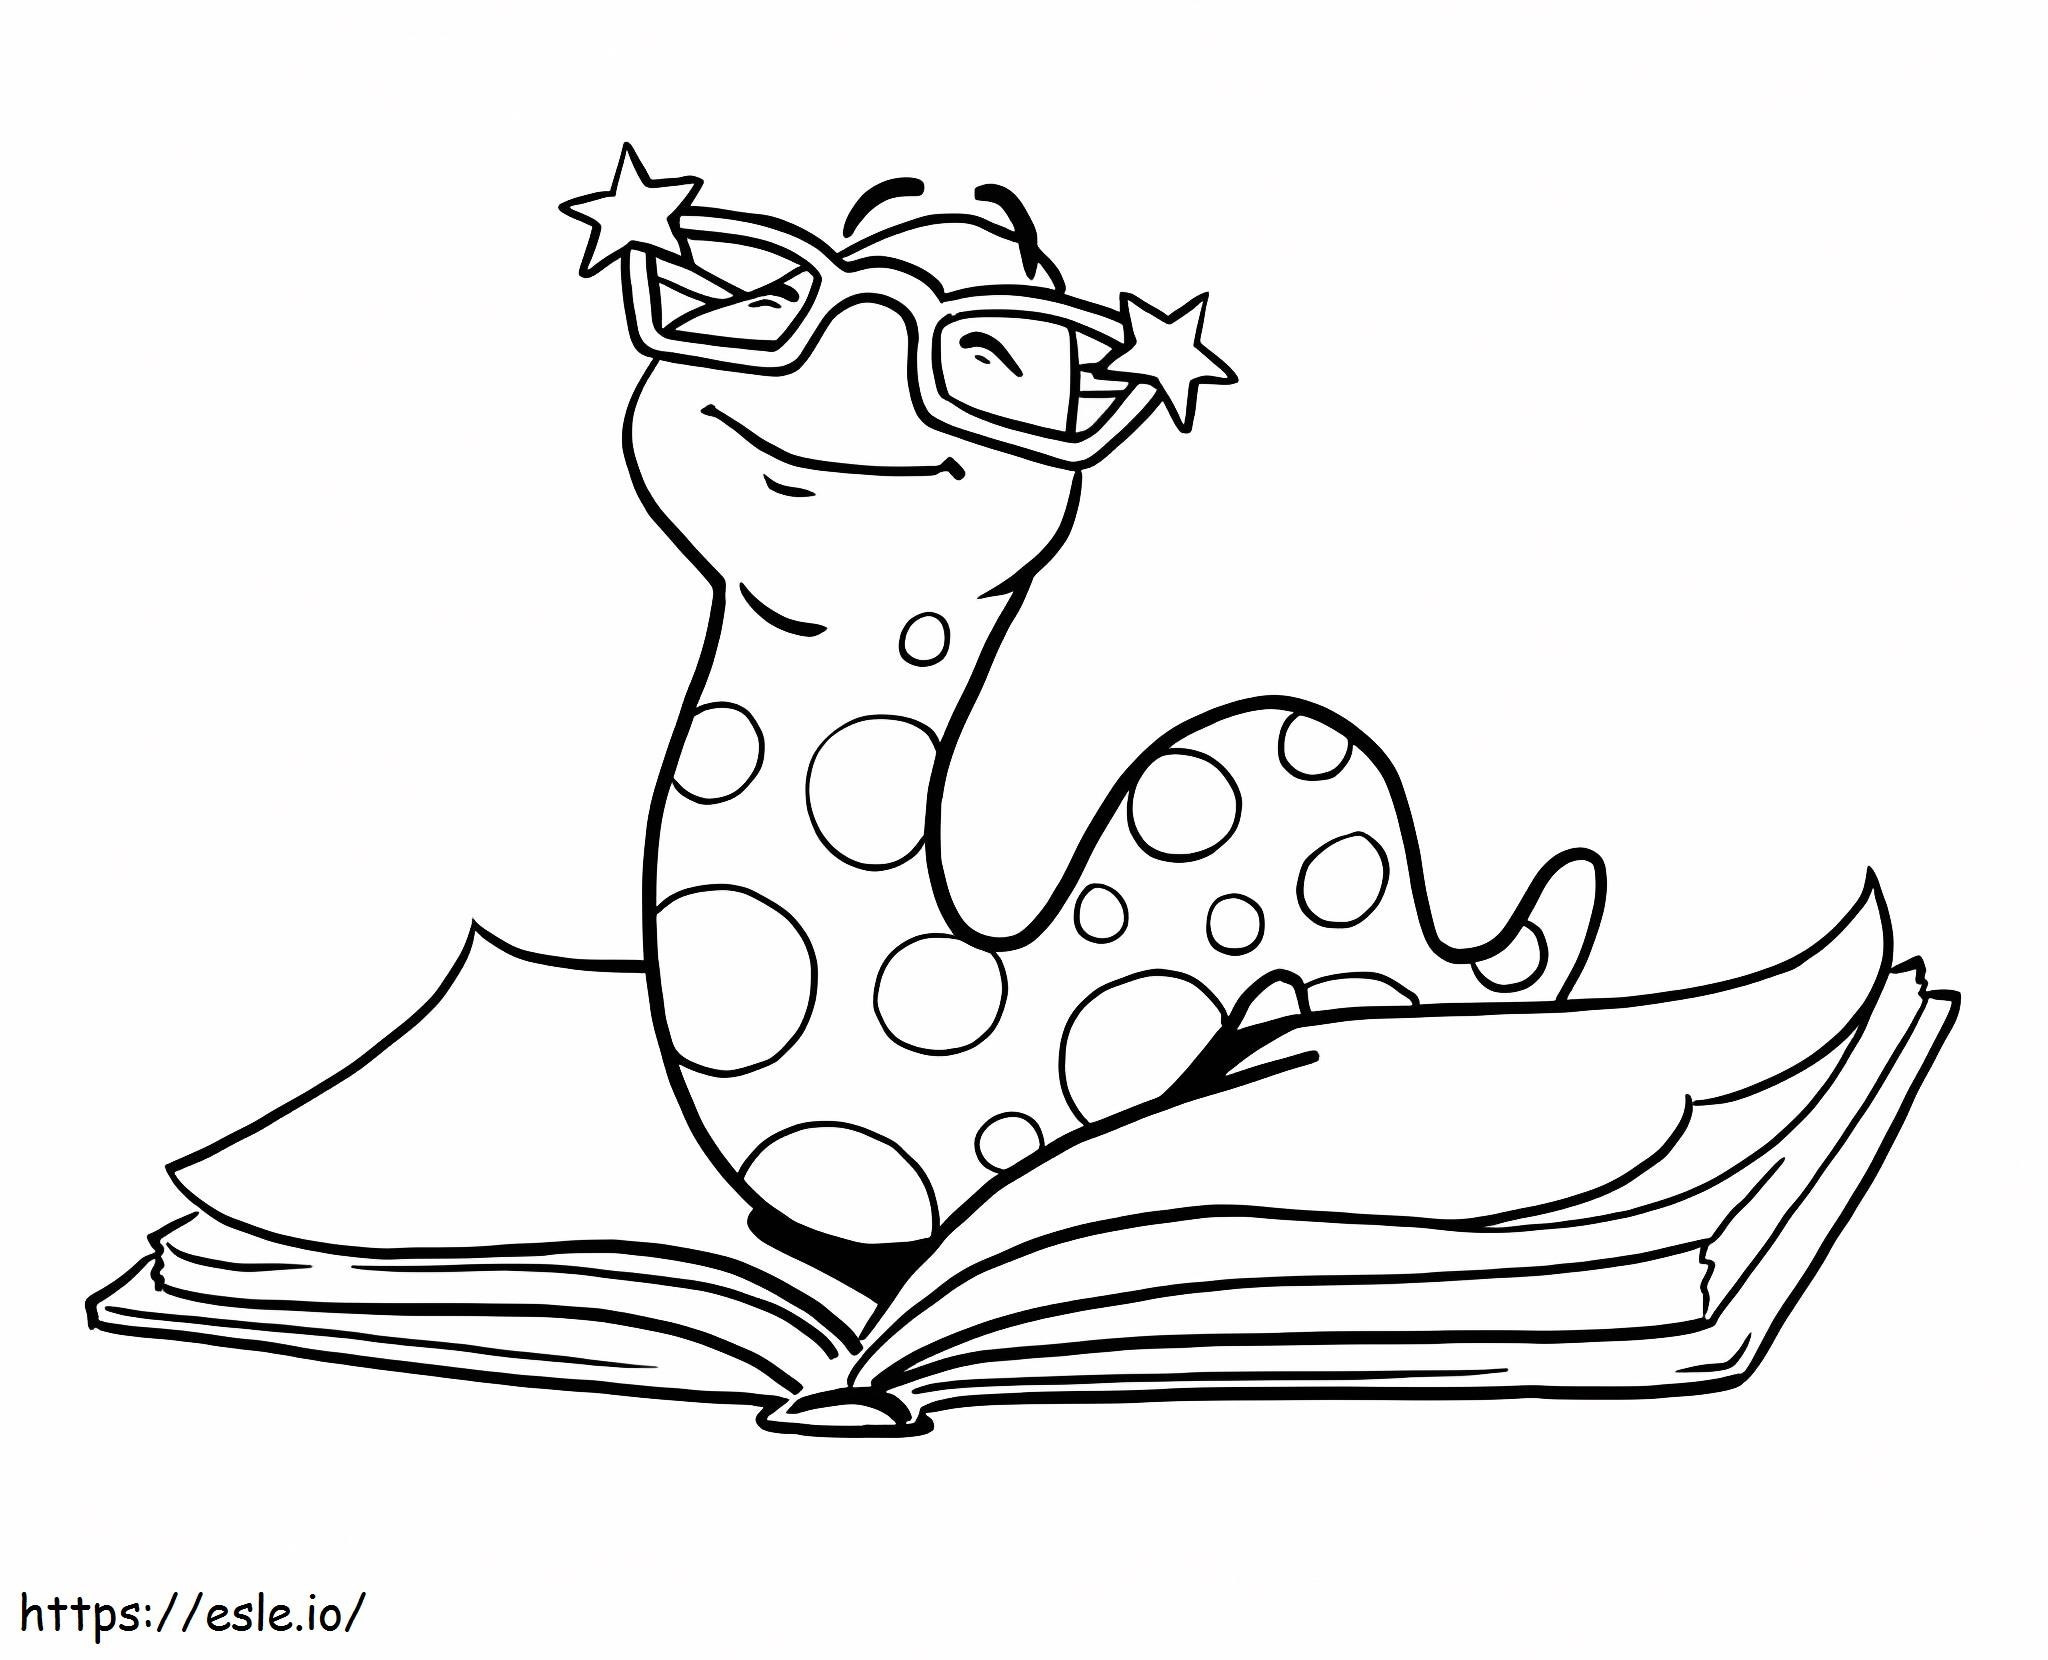 Snake Smiling On Book coloring page